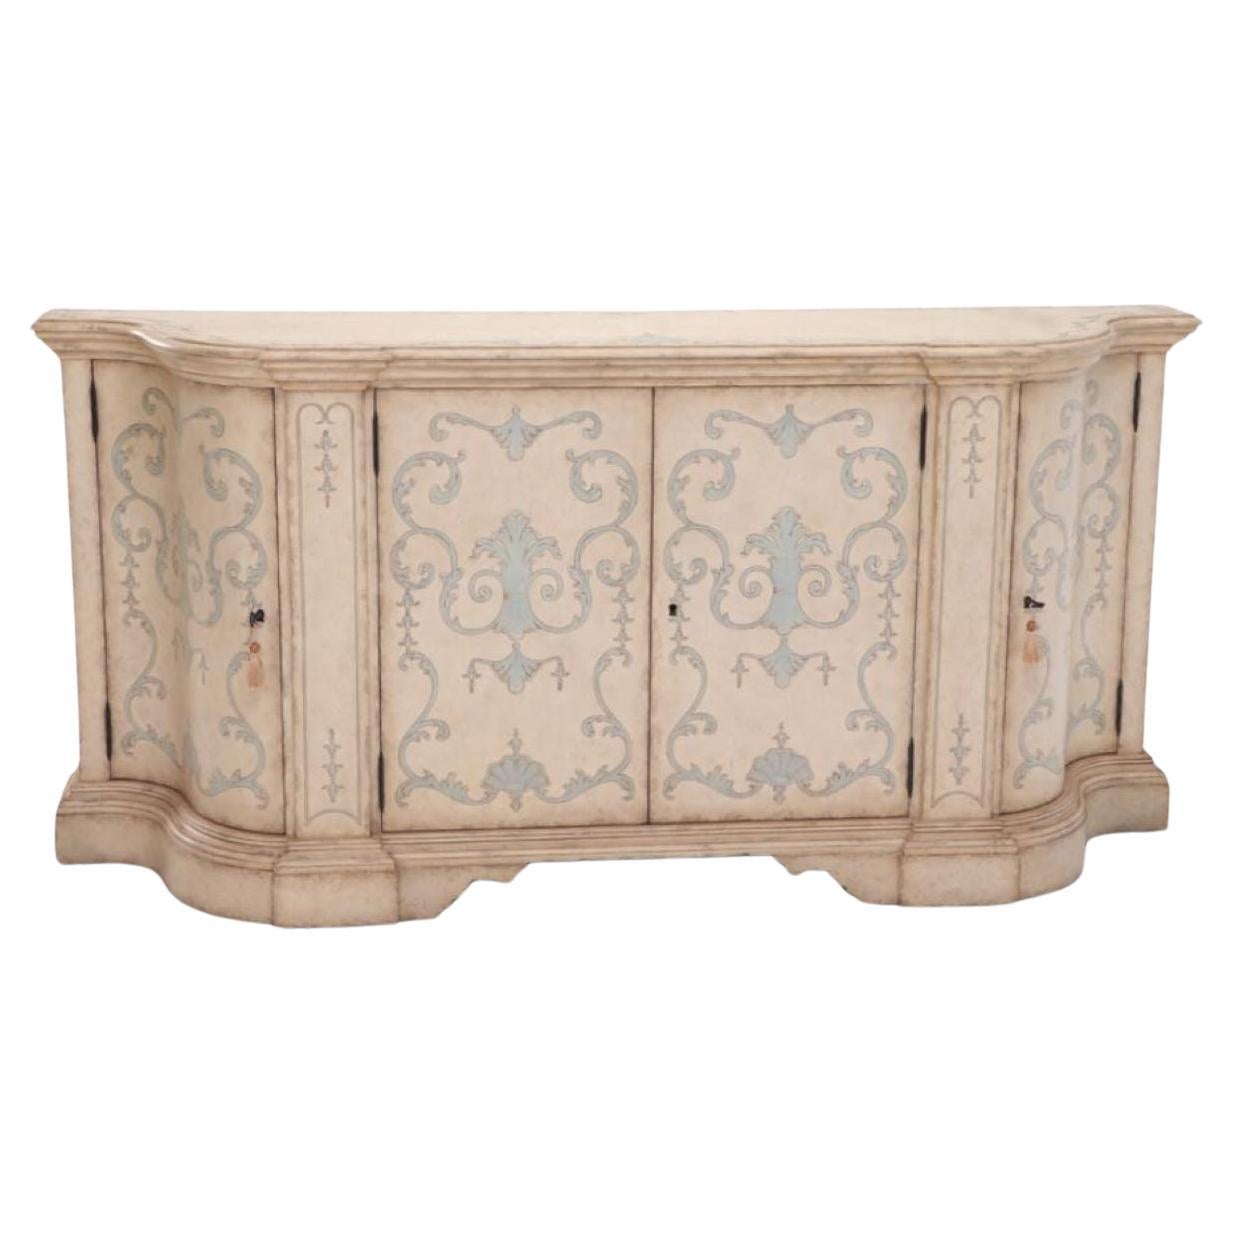 Theodre Alexander Venetion style painted sideboard or credenza For Sale